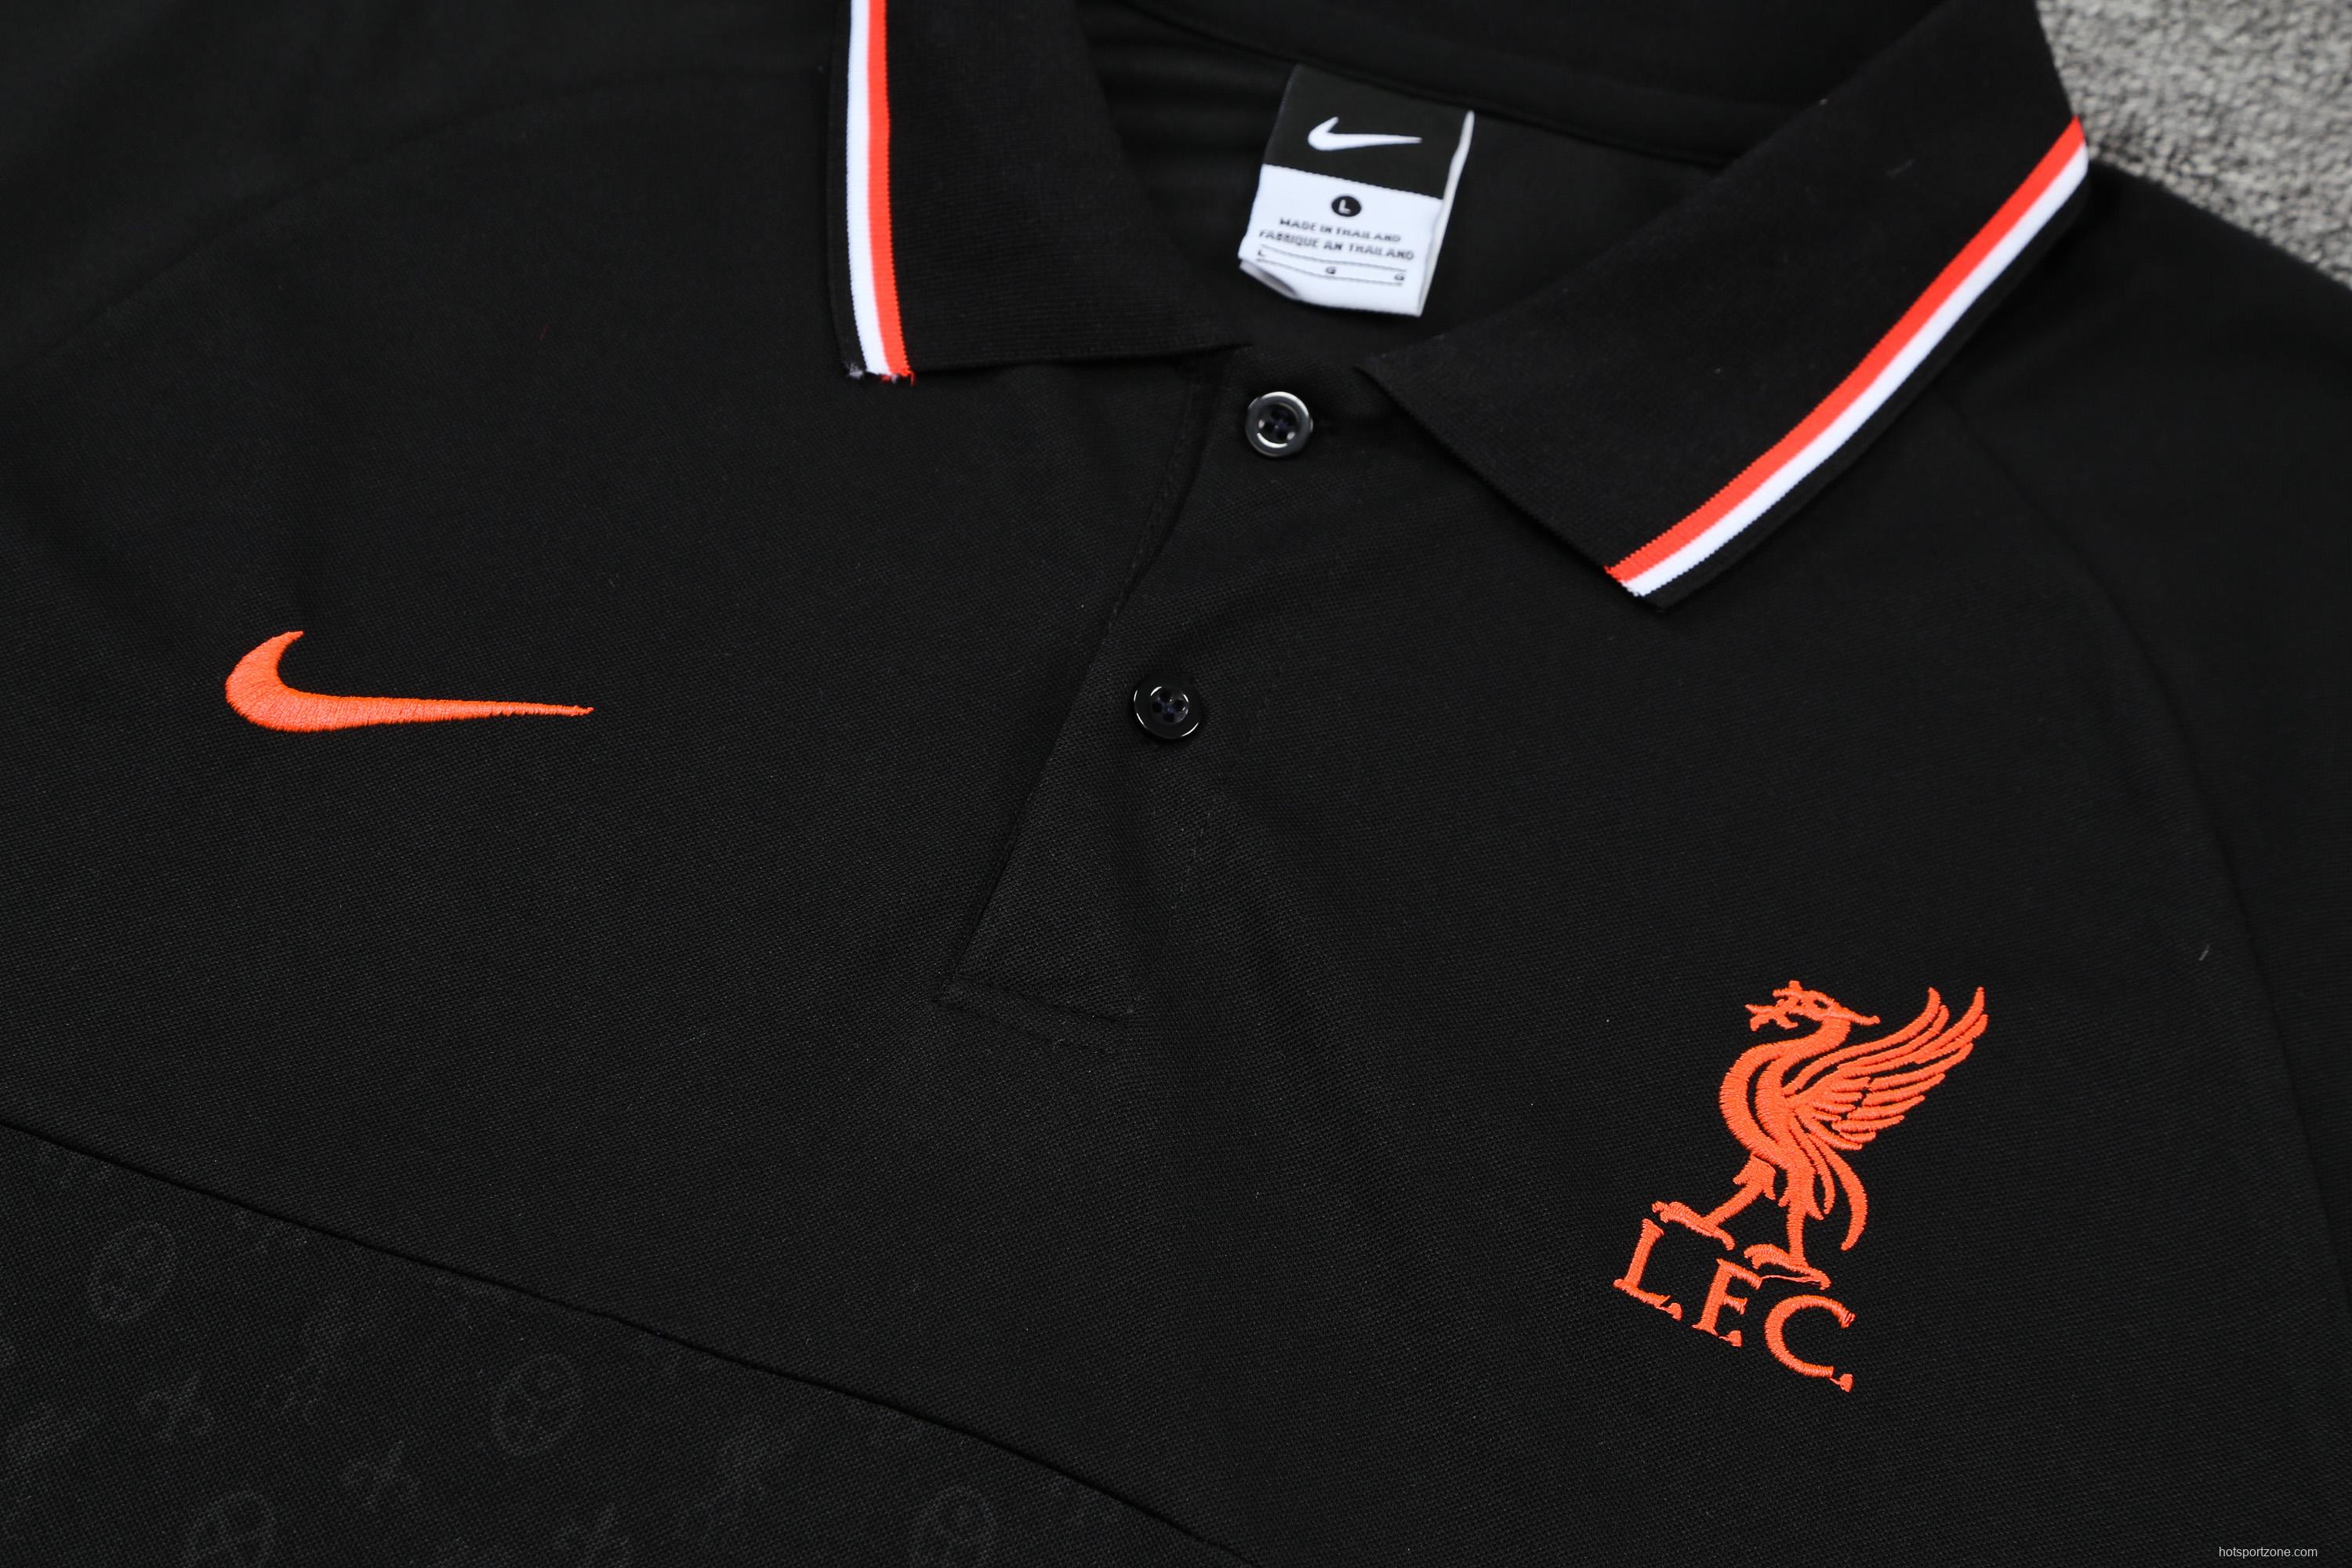 Liverpool POLO kit Black(not supported to be sold separately)